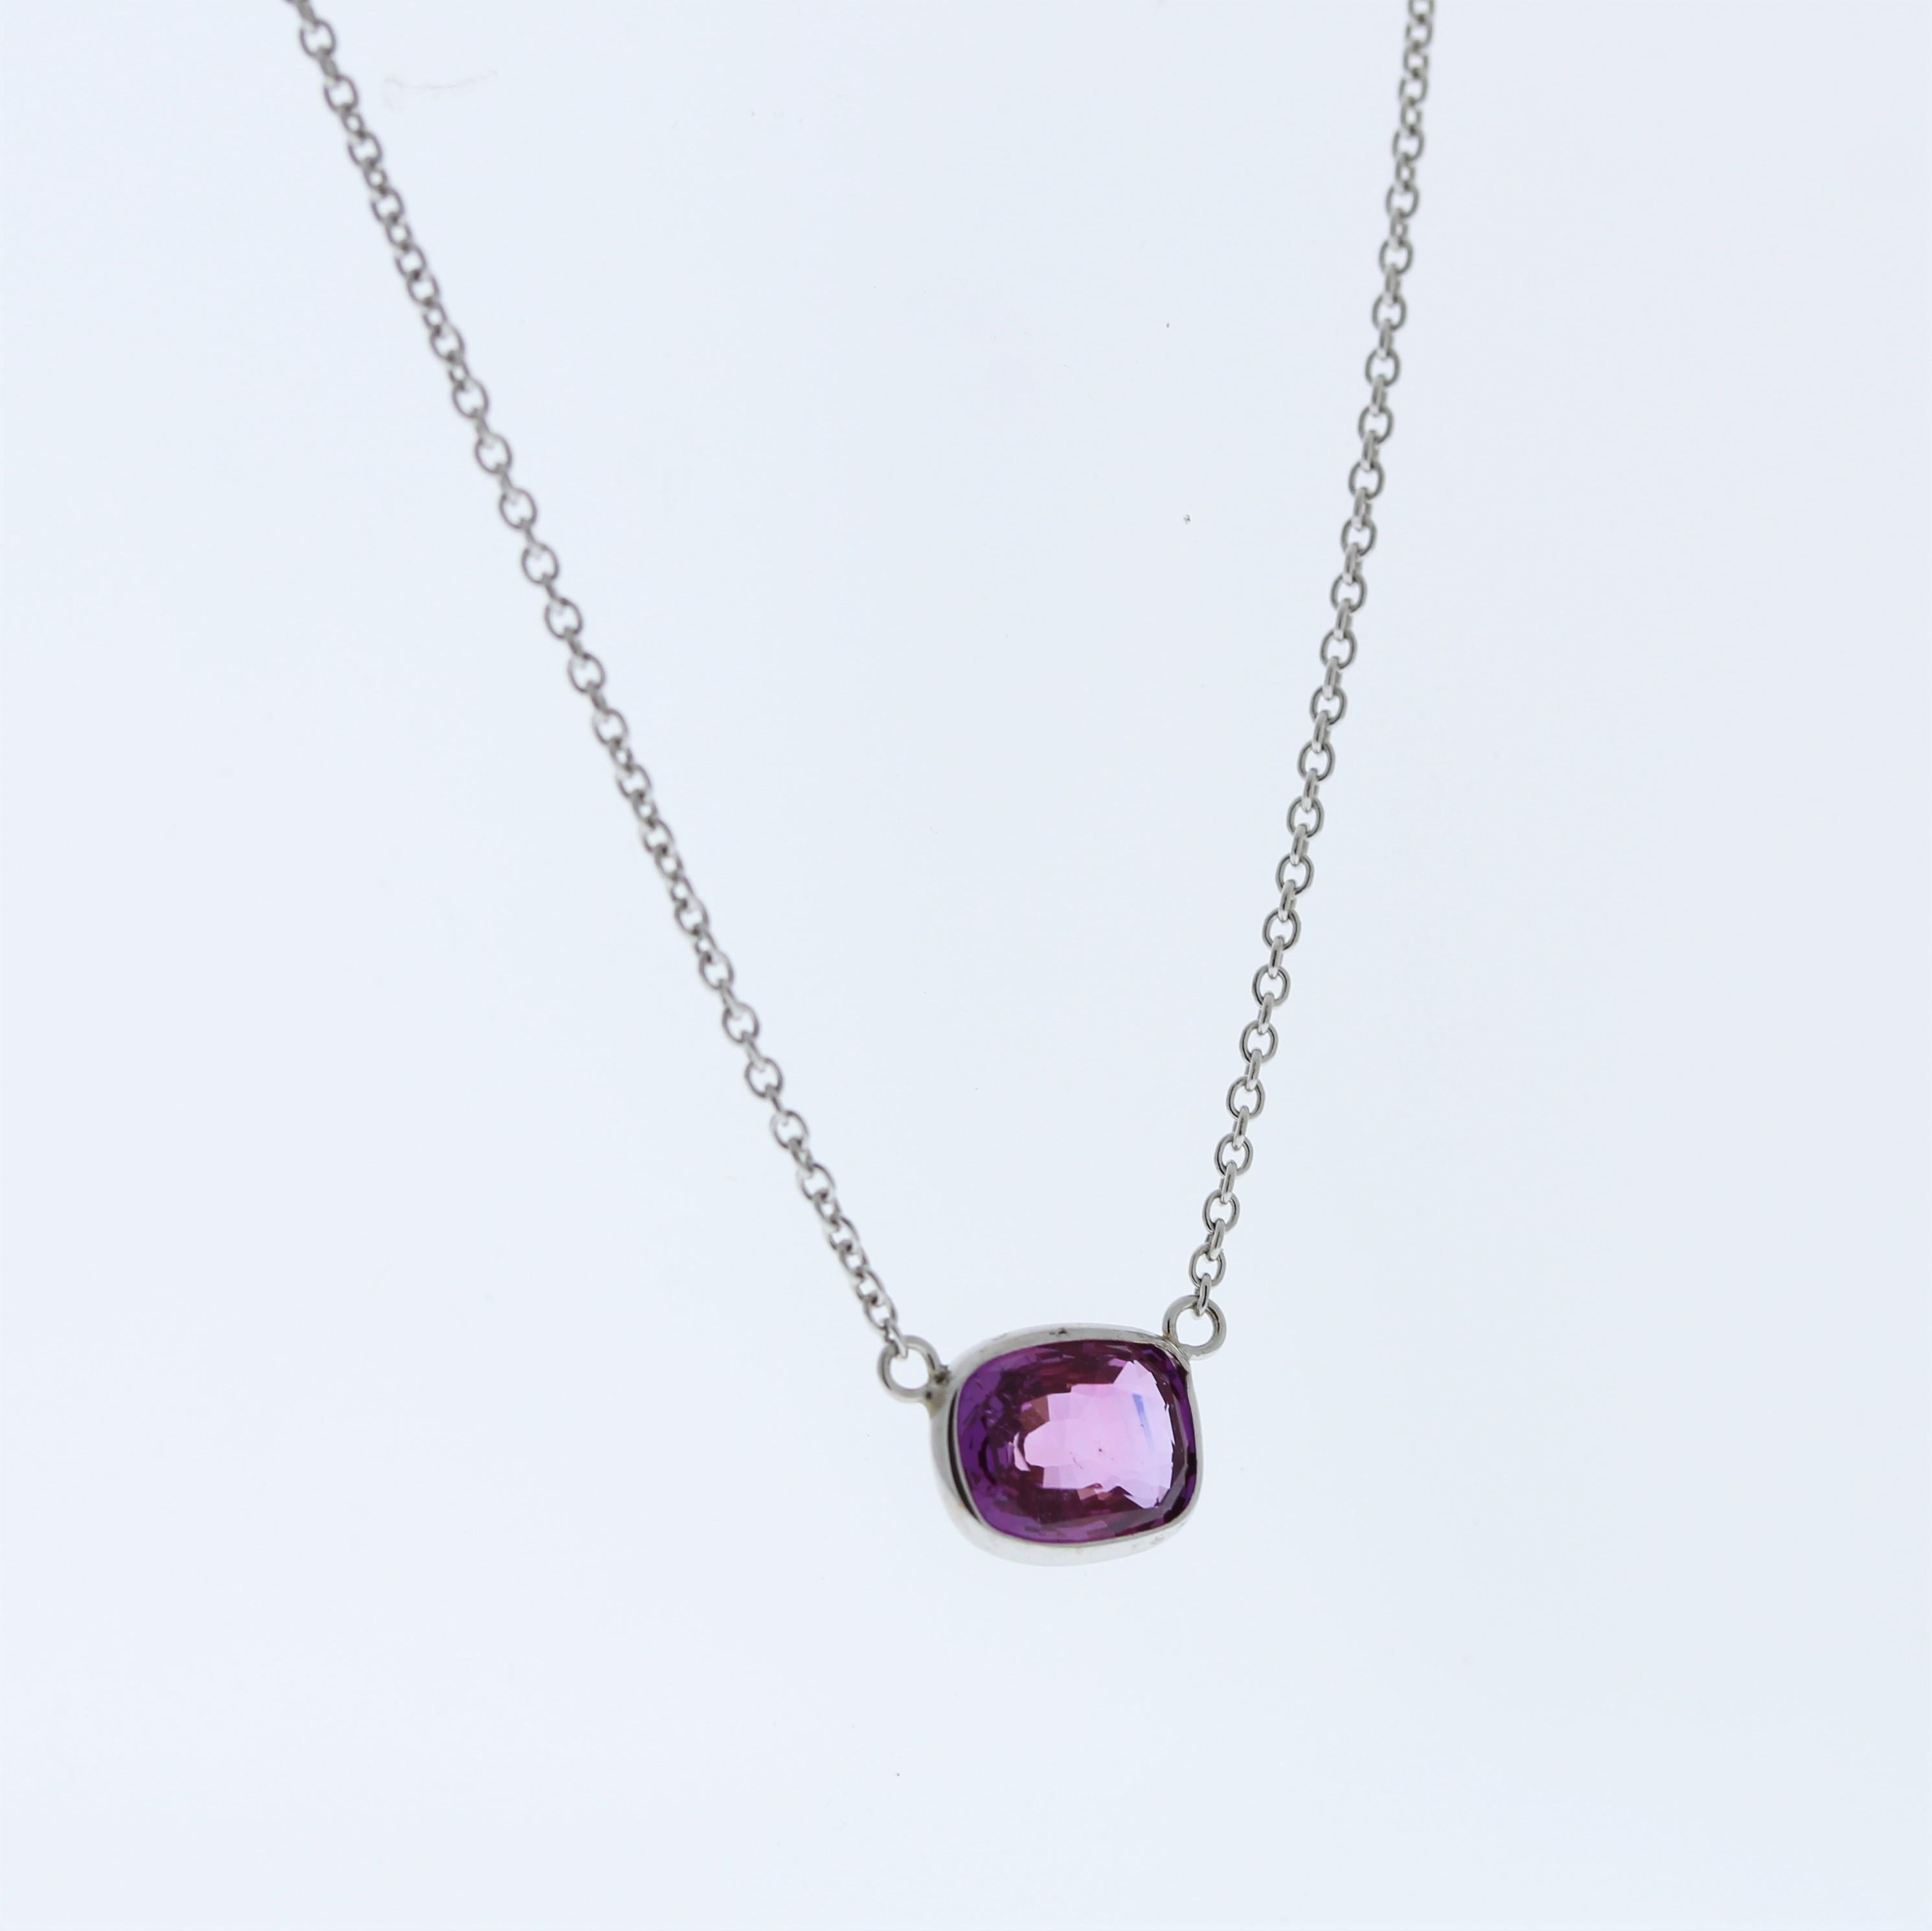 The necklace features a 2.08-carat cushion-cut purplish pink sapphire set in a 14 karat white gold pendant or setting. The combination of the purplish pink sapphire and the white gold setting likely creates an elegant and eye-catching piece of